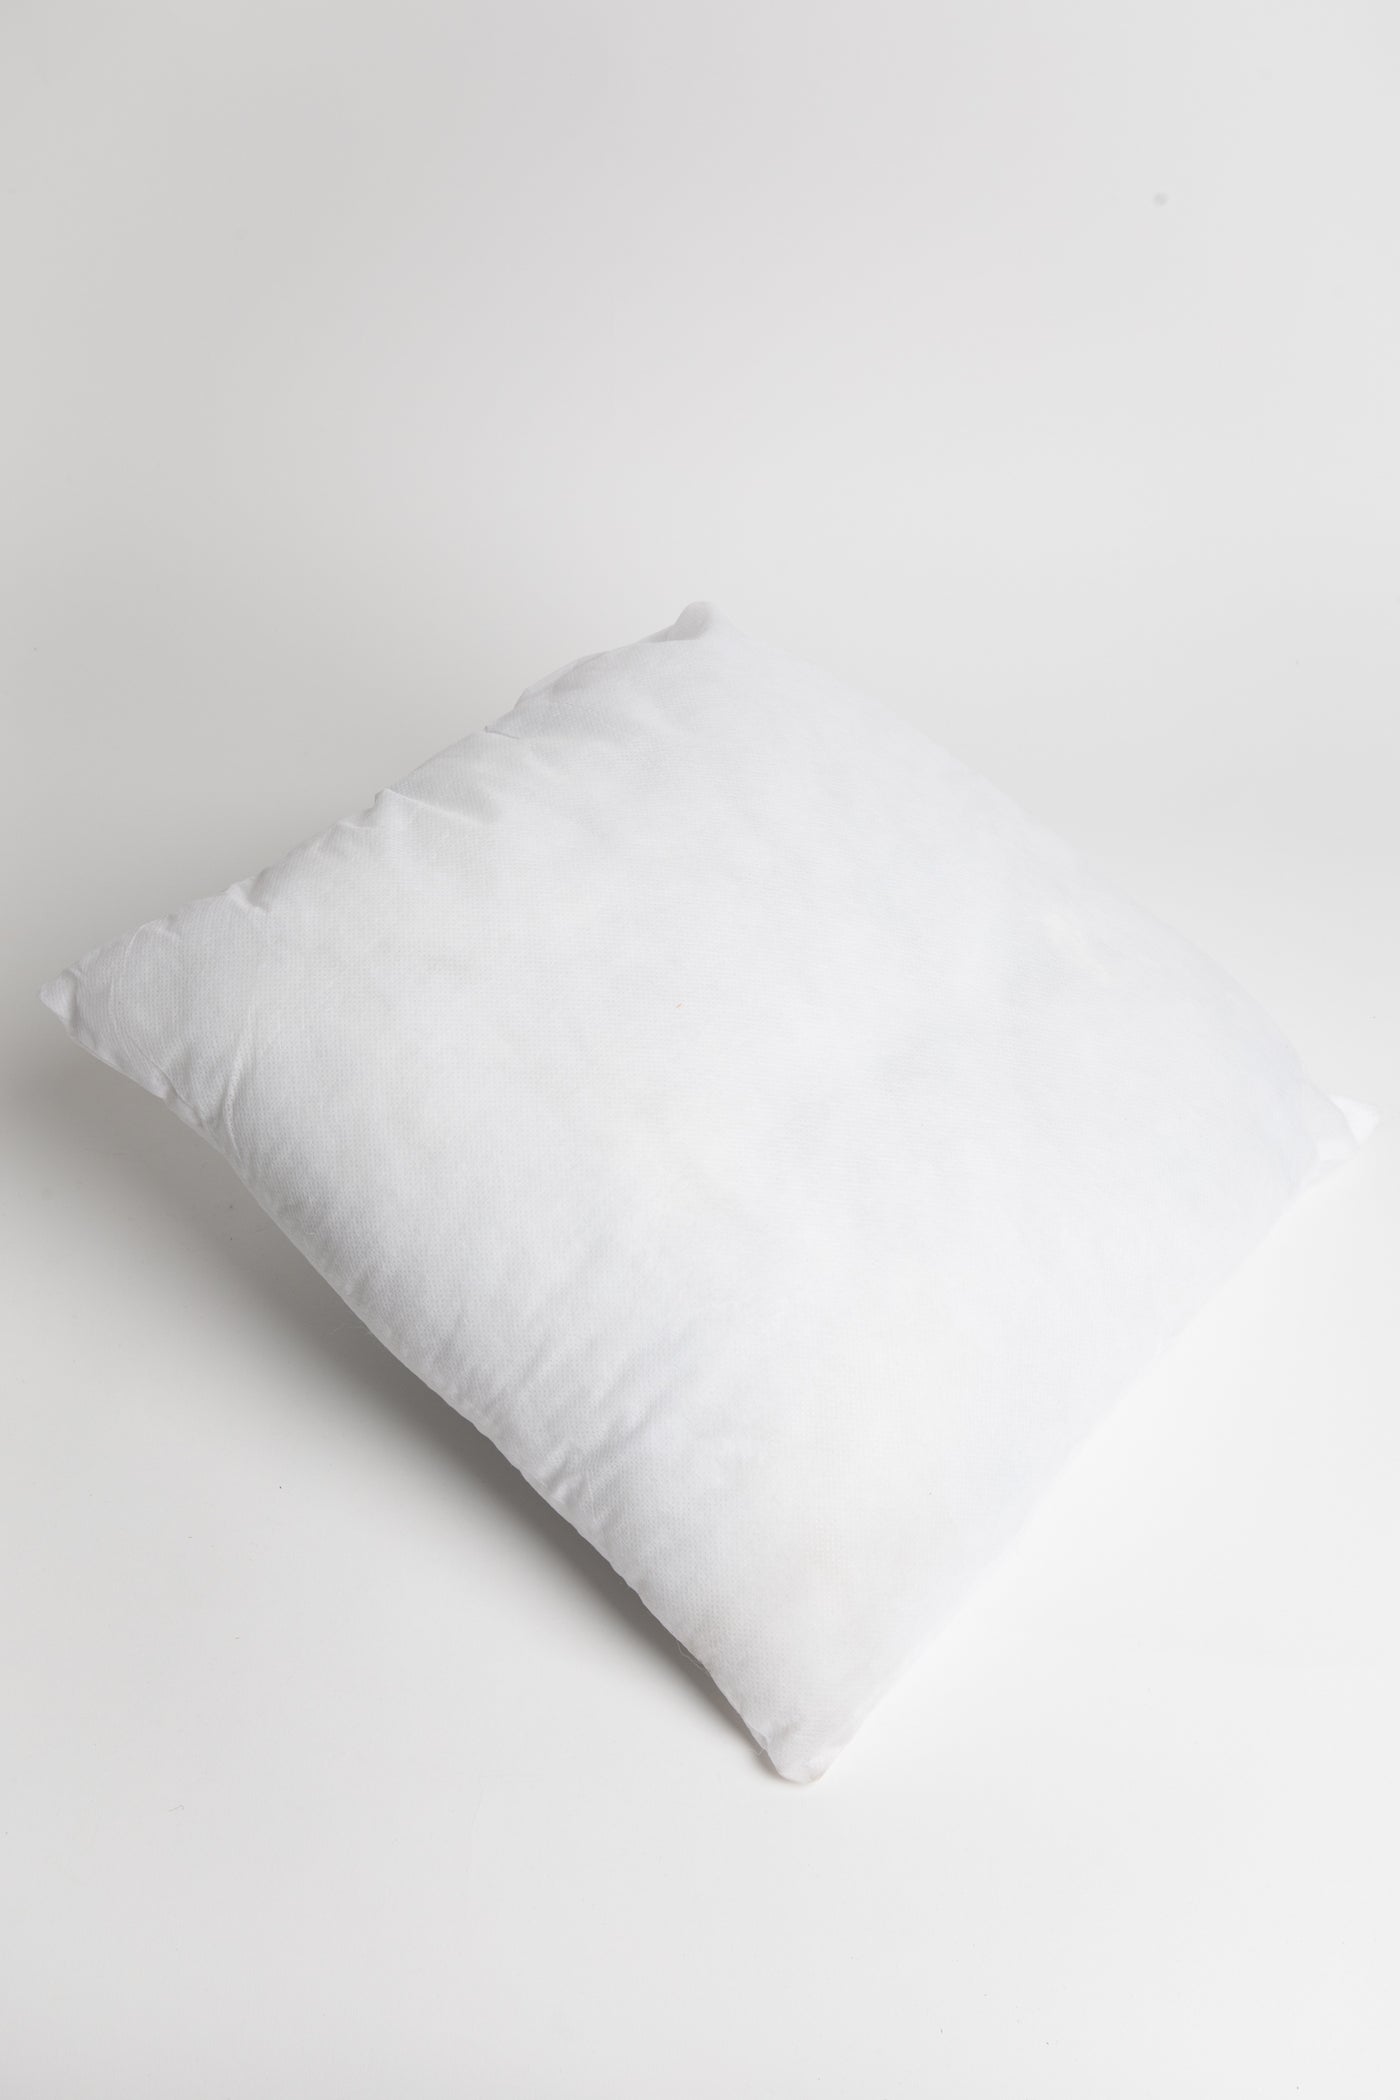 Square 16x16 Polyfill Pillow Insert from Pillow Decor